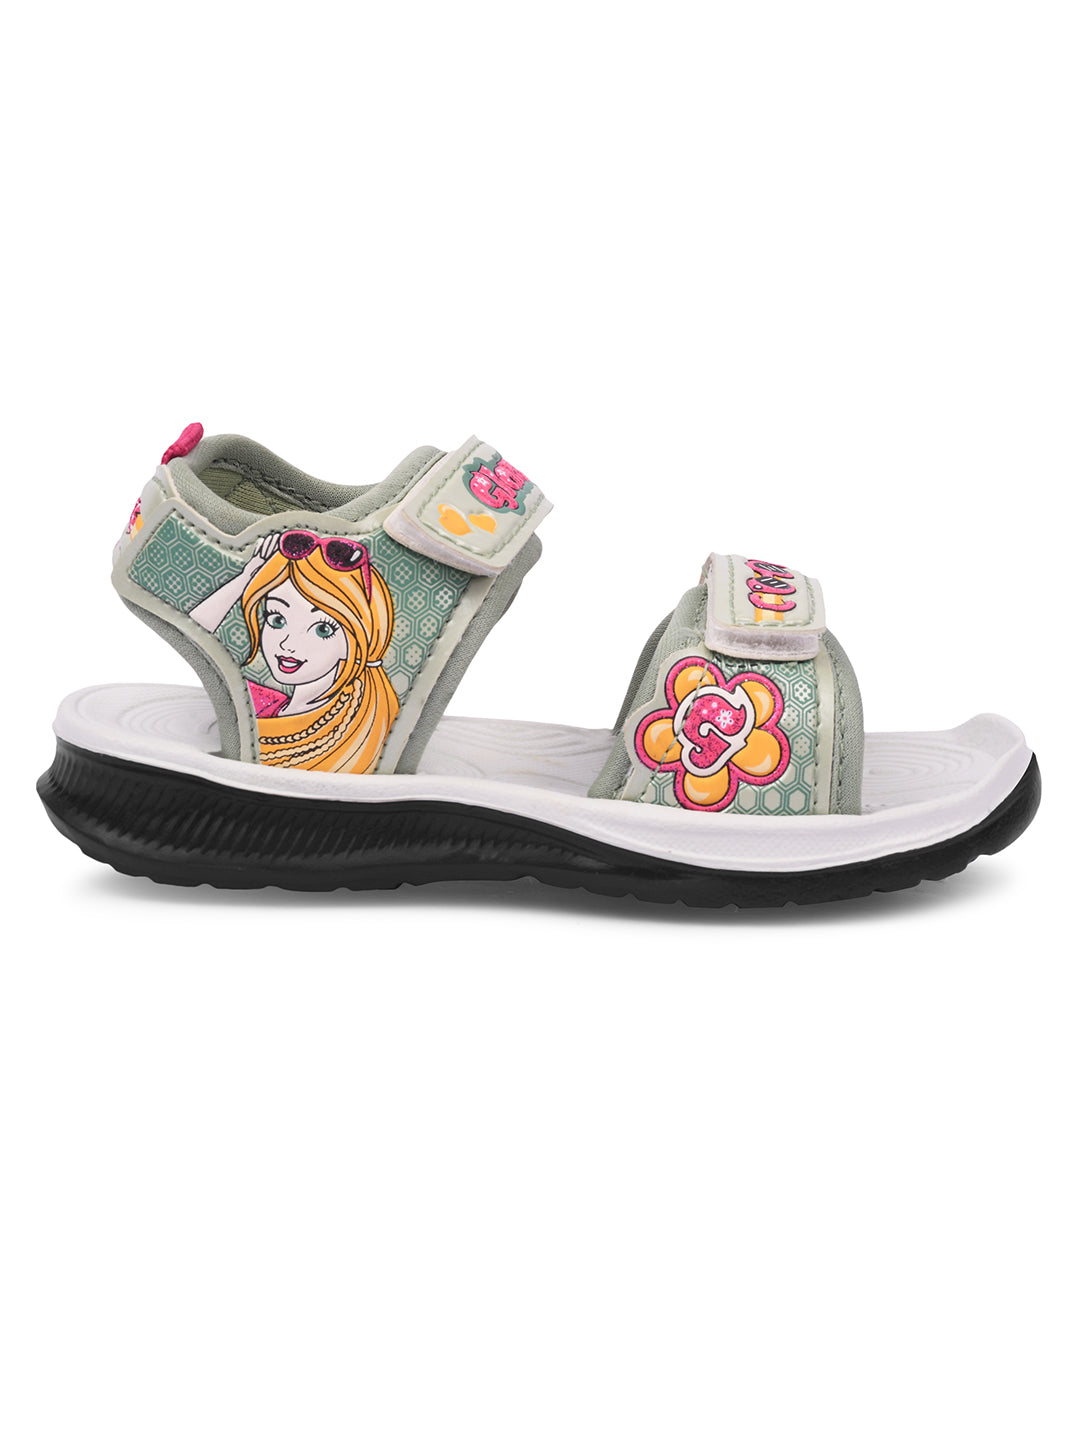 Kats GLAMOUR Kids Boys and Girls Printed Sandals (2 to 5 Years)